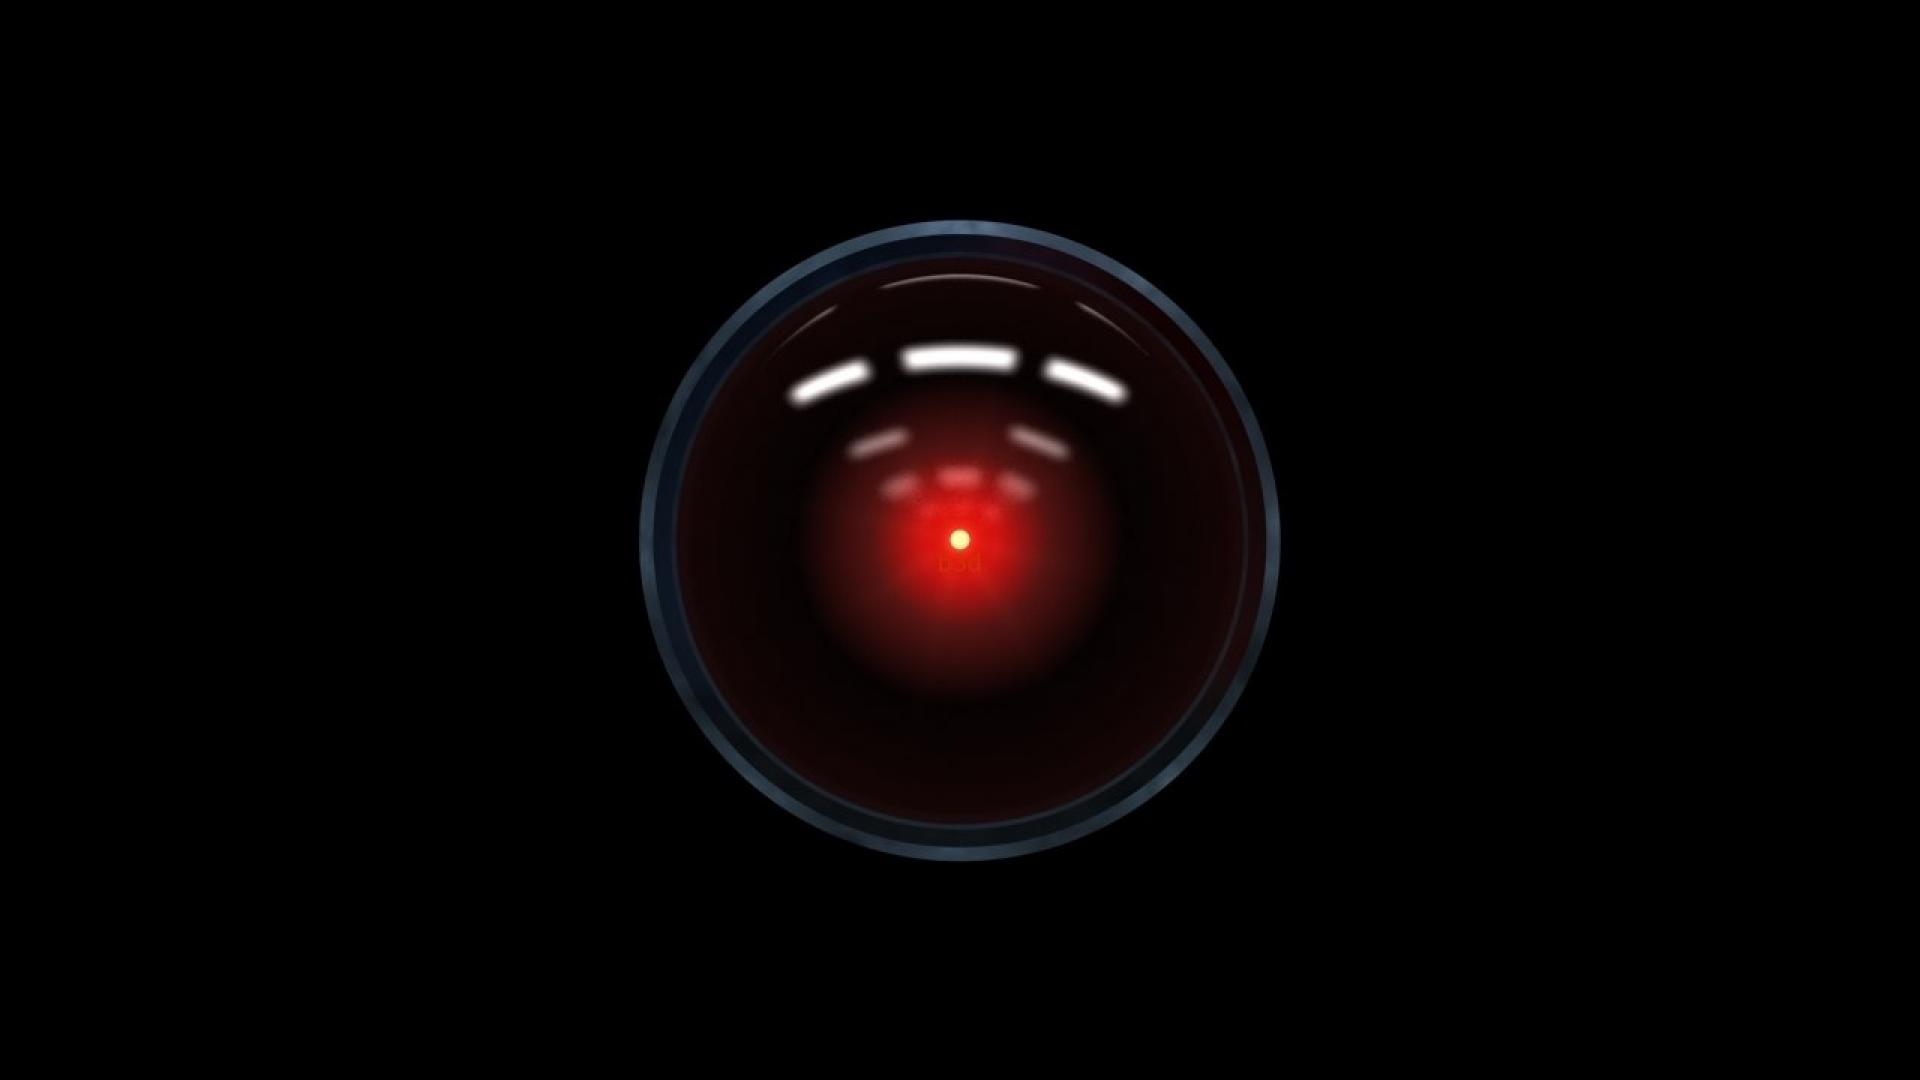 HAL 9000 will never appear: emotions are not programmed